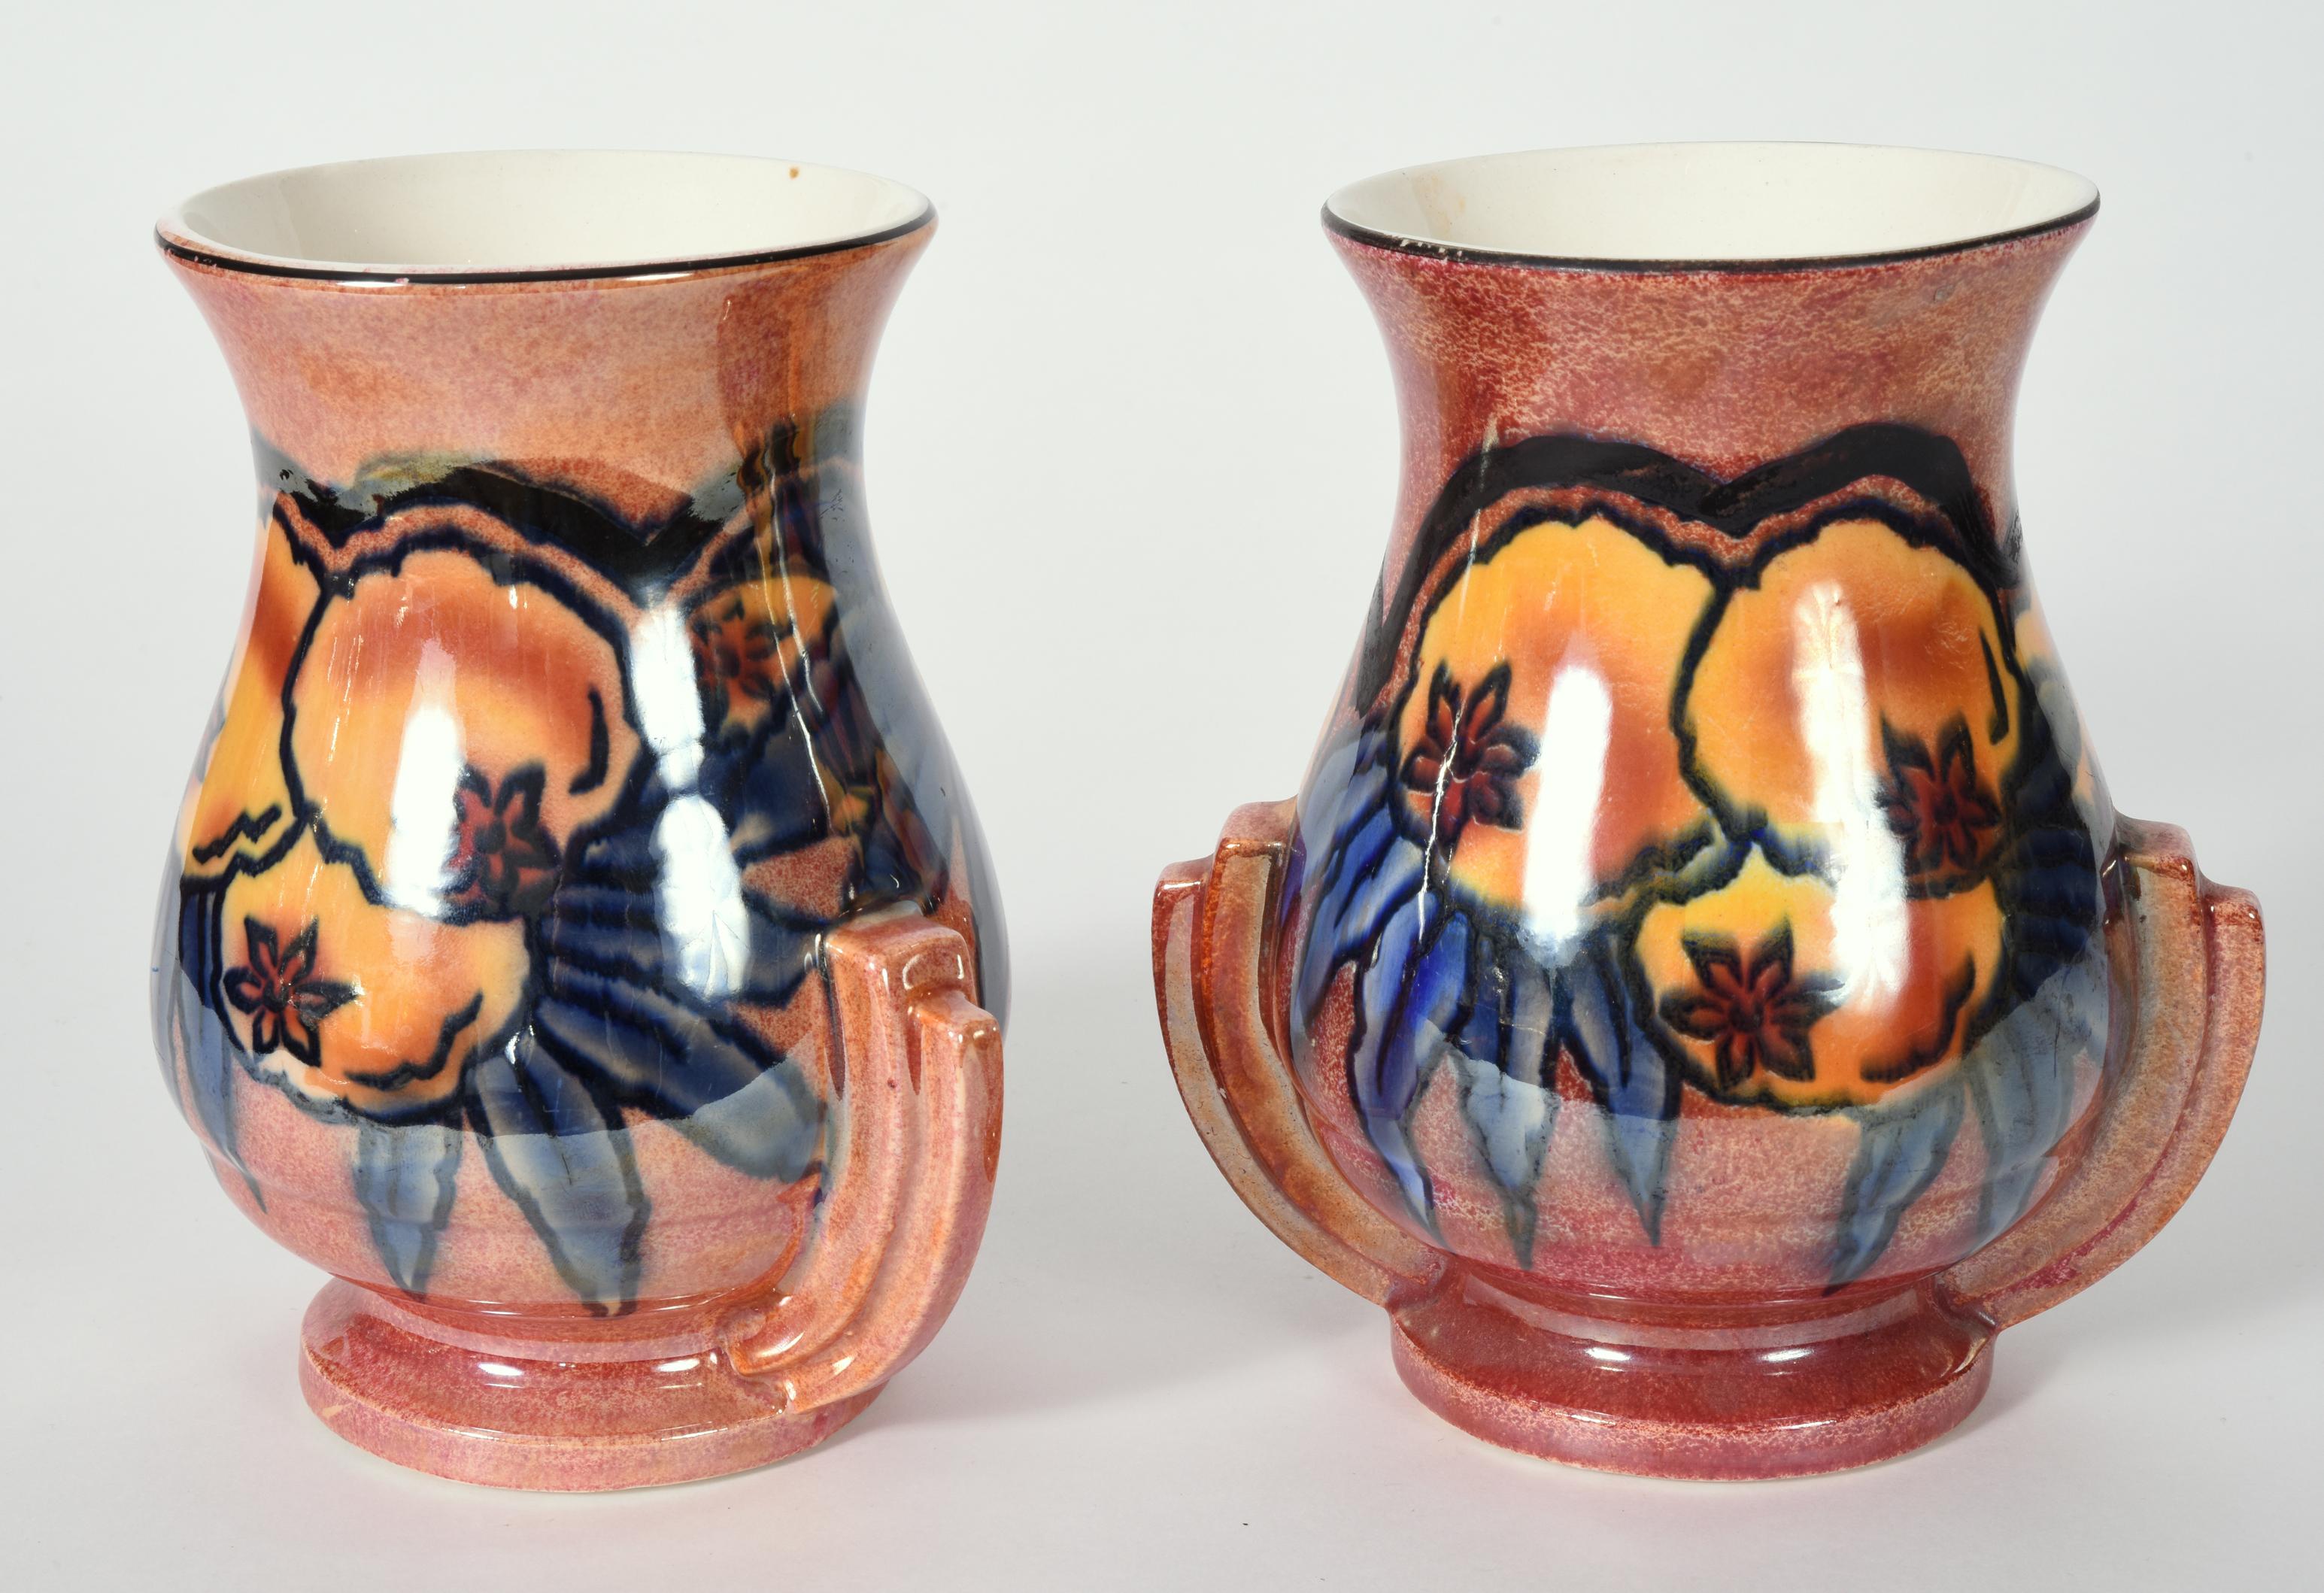 Vintage pair of English glazed art pottery vases / decorative pieces. Each vase is in excellent vintage condition, Maker's mark undersigned. Each vase measure about 7 inches high X 7 inches diameter.